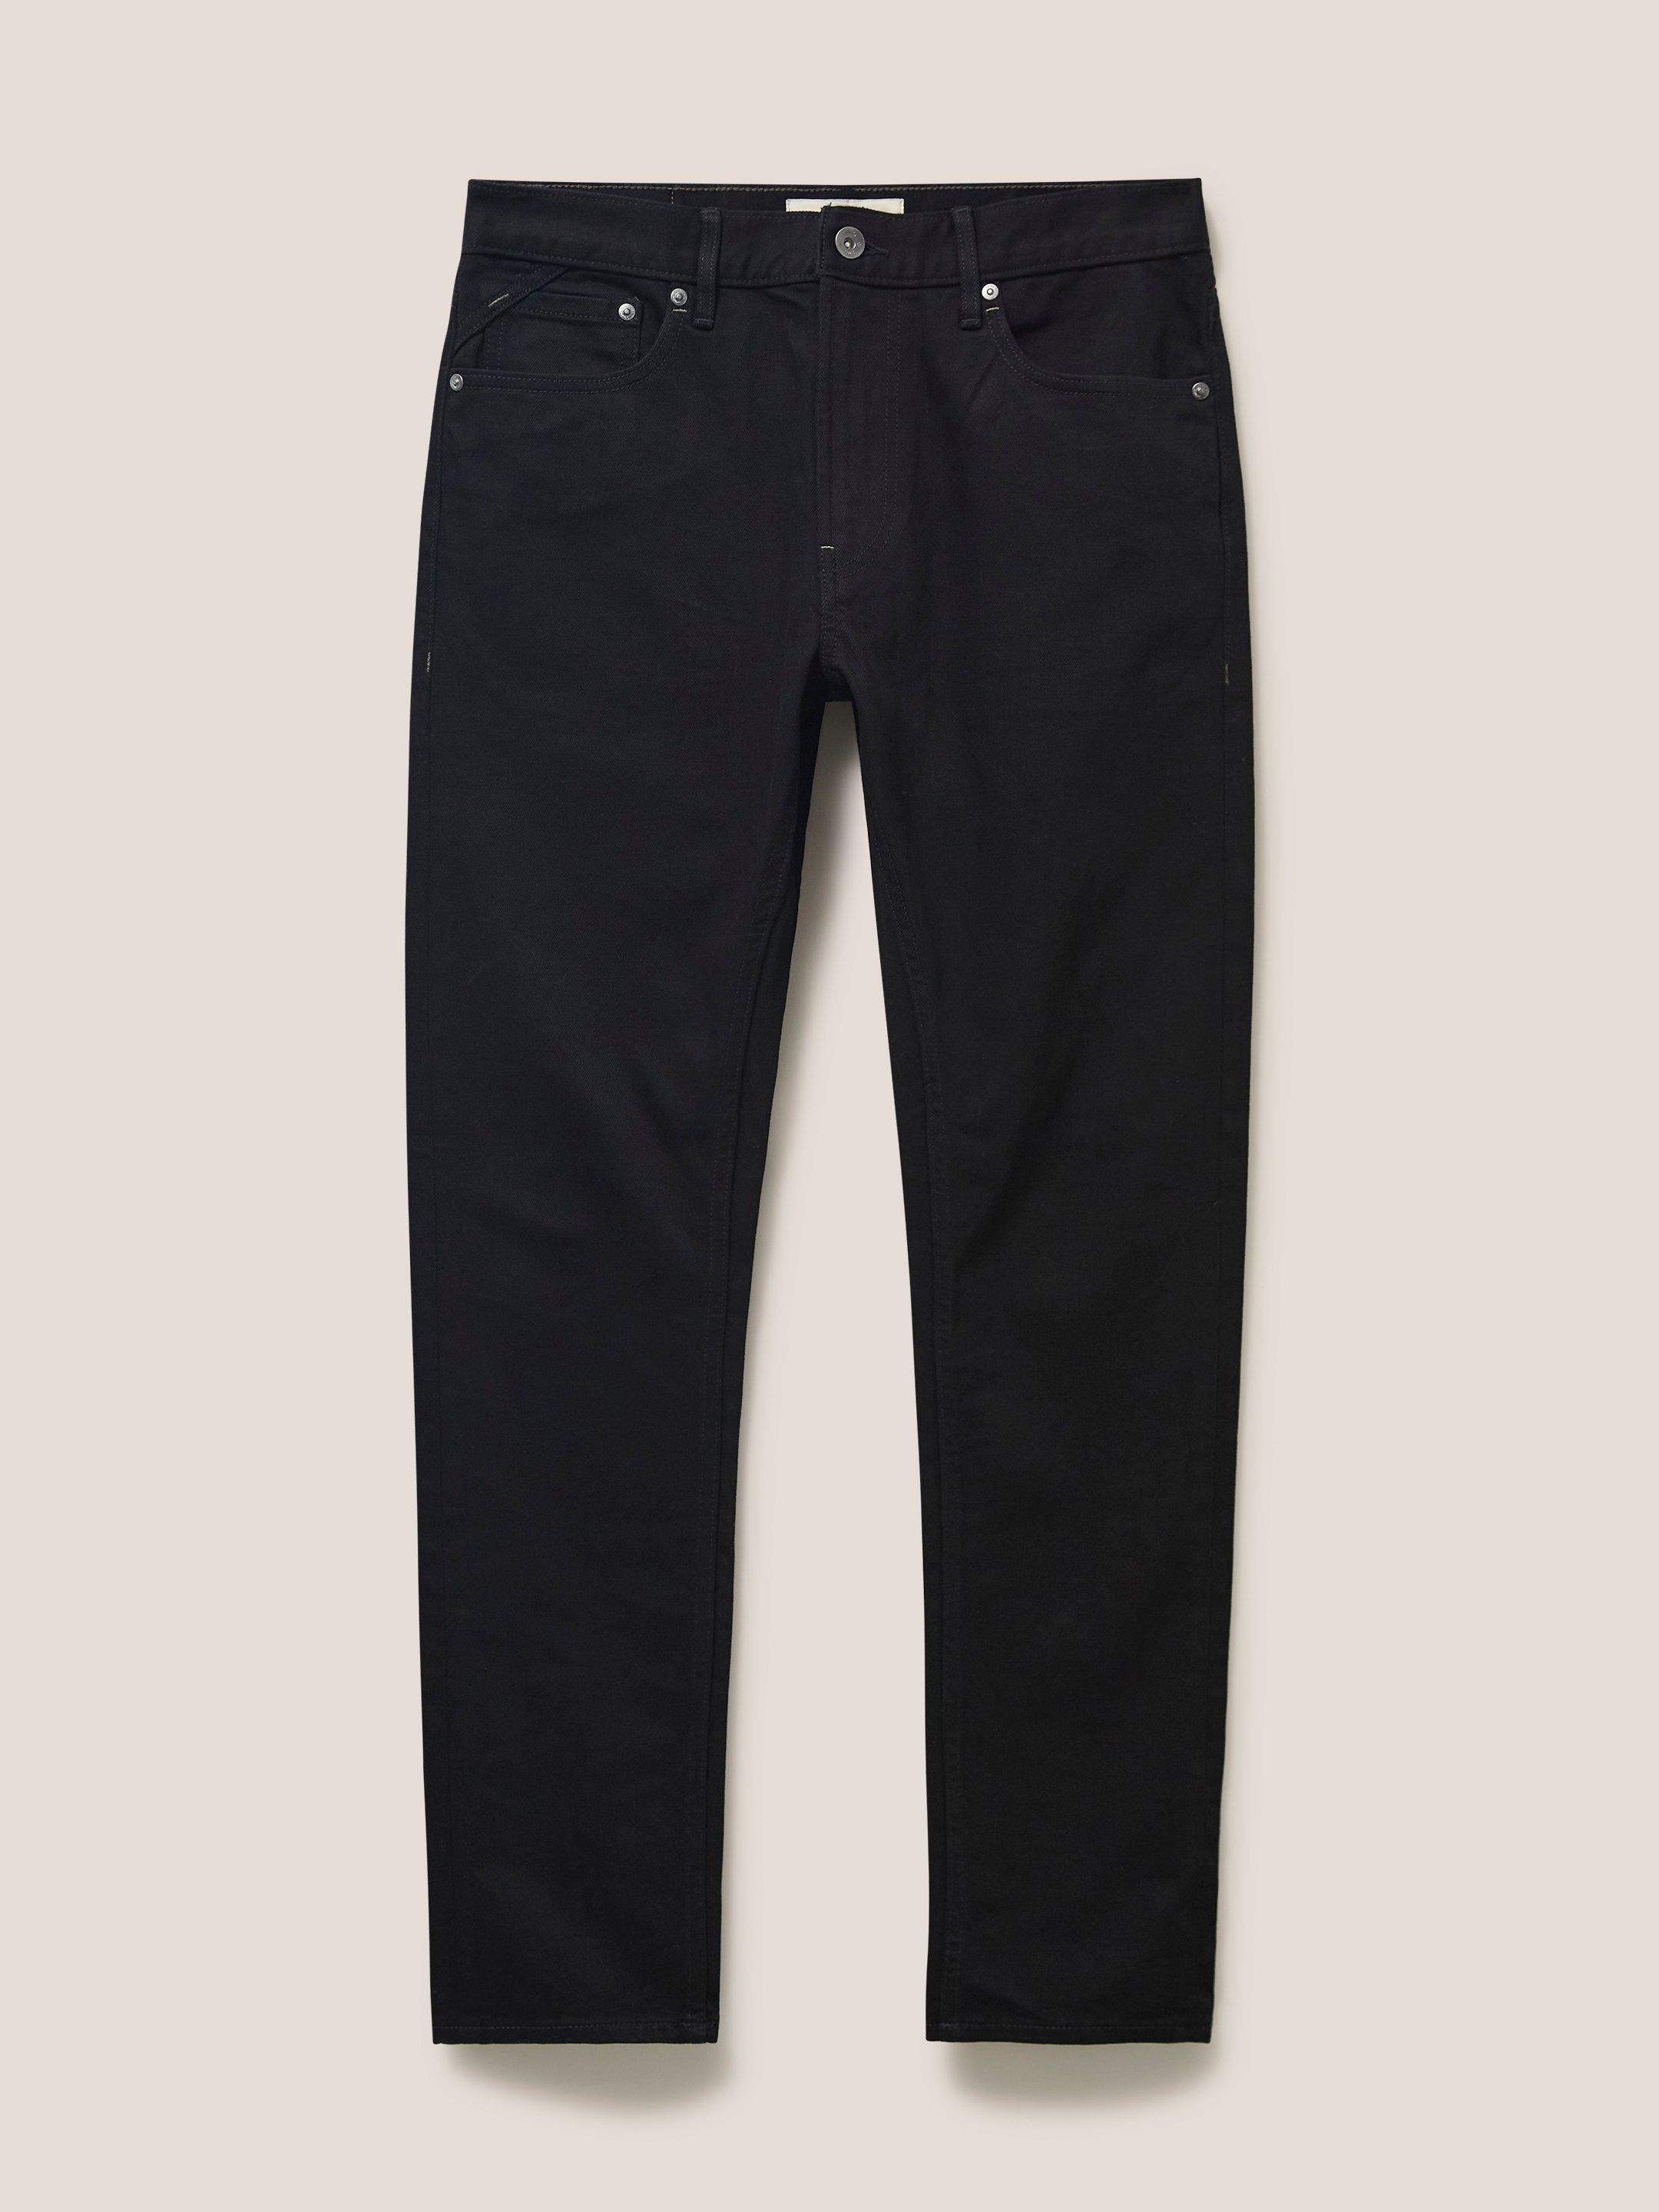 Harwood Slim Jean in PURE BLK - FLAT FRONT